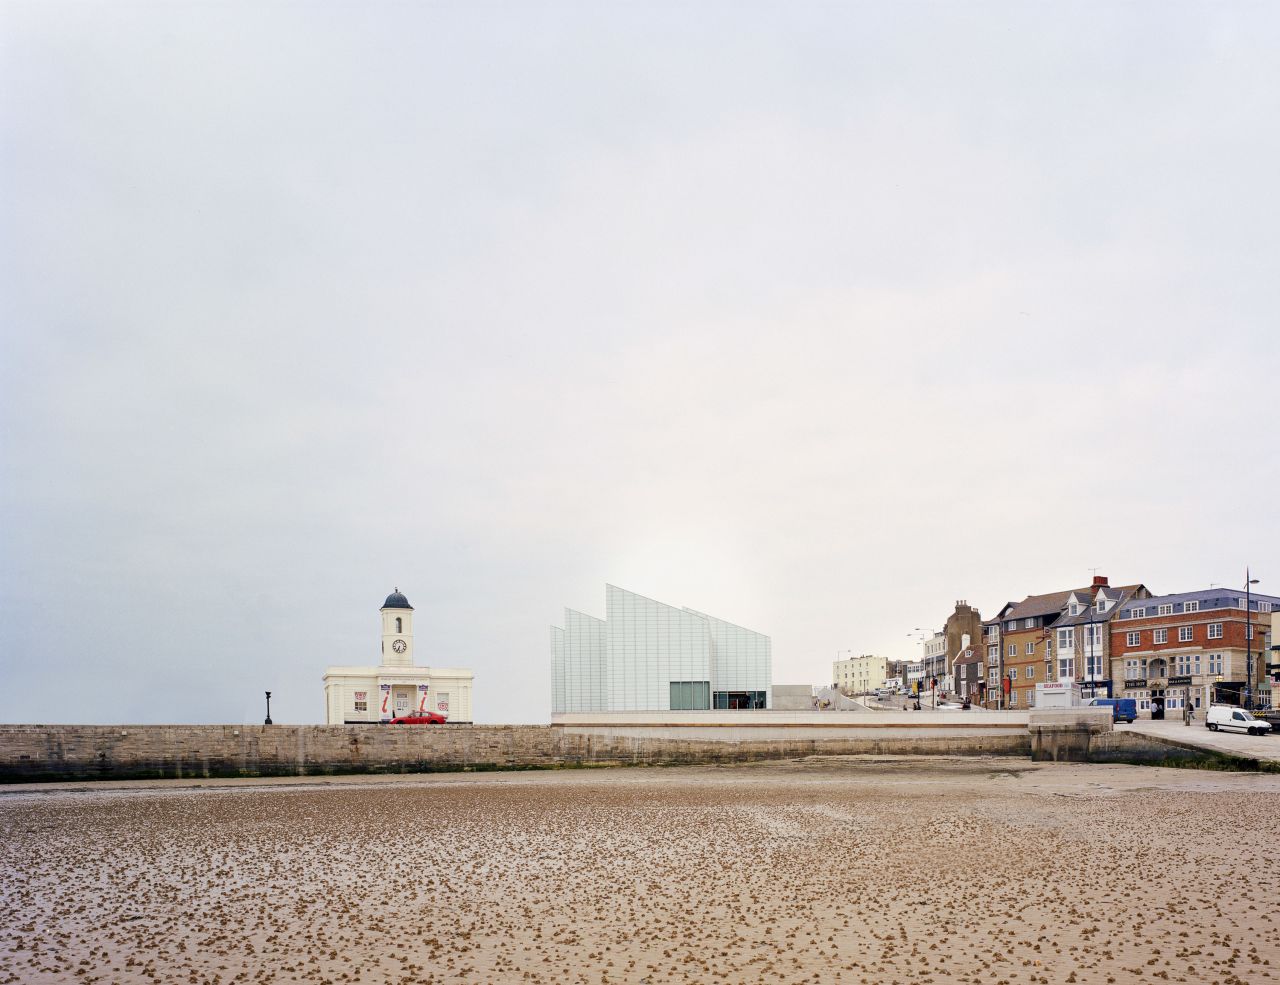 Located on the north coast of Kent, UK, the Turner Contemporary museum sees a concrete frame with acid-etched glass skin raised on a plinth.